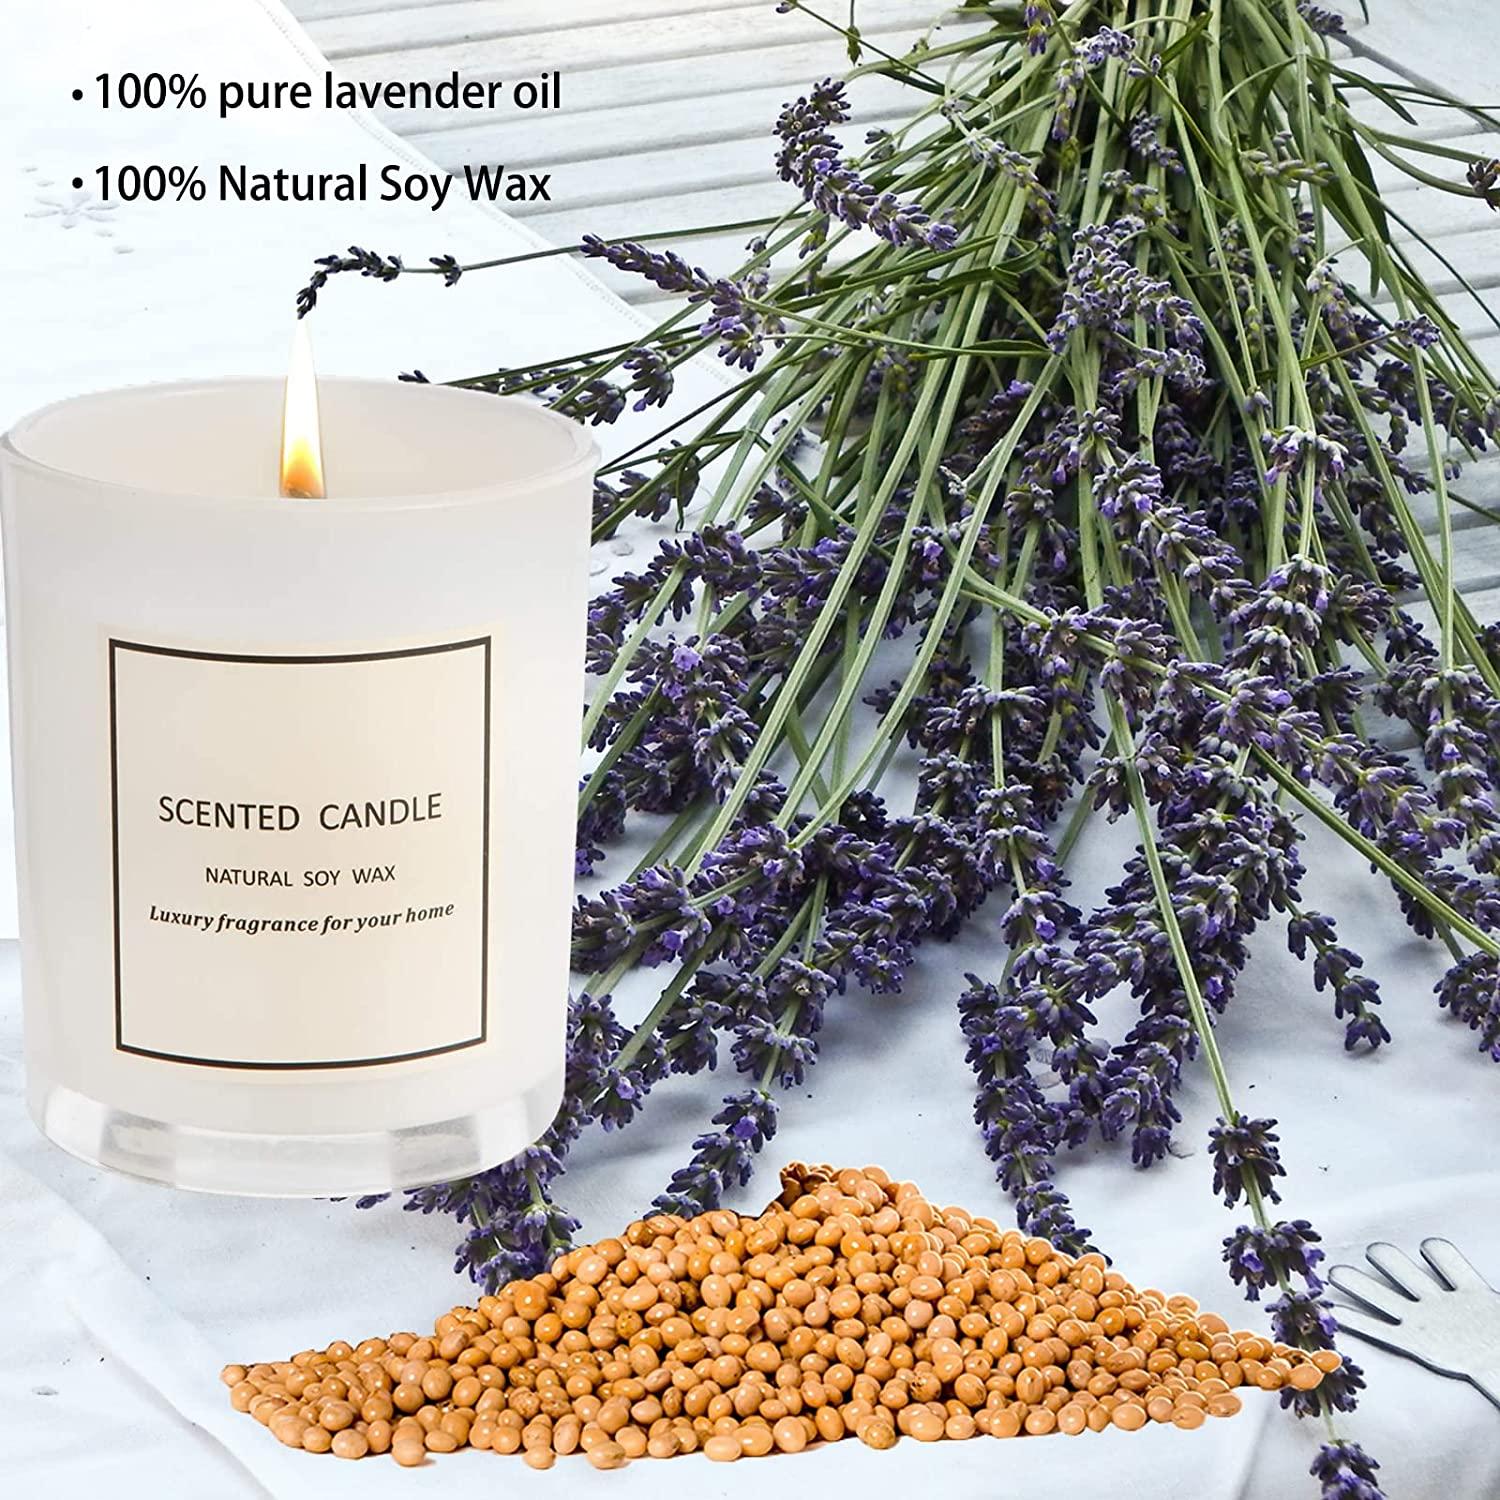 Gifts for Women&Men - Gifts Under 10 Dollars, Candles for Home Scented,  100% Pure Natural Soybean Wax with Plant Essential Oils, Perfect for Bath,  Yoga, Christmas, Birthday, Mother's Day(Lavender) White-lavender